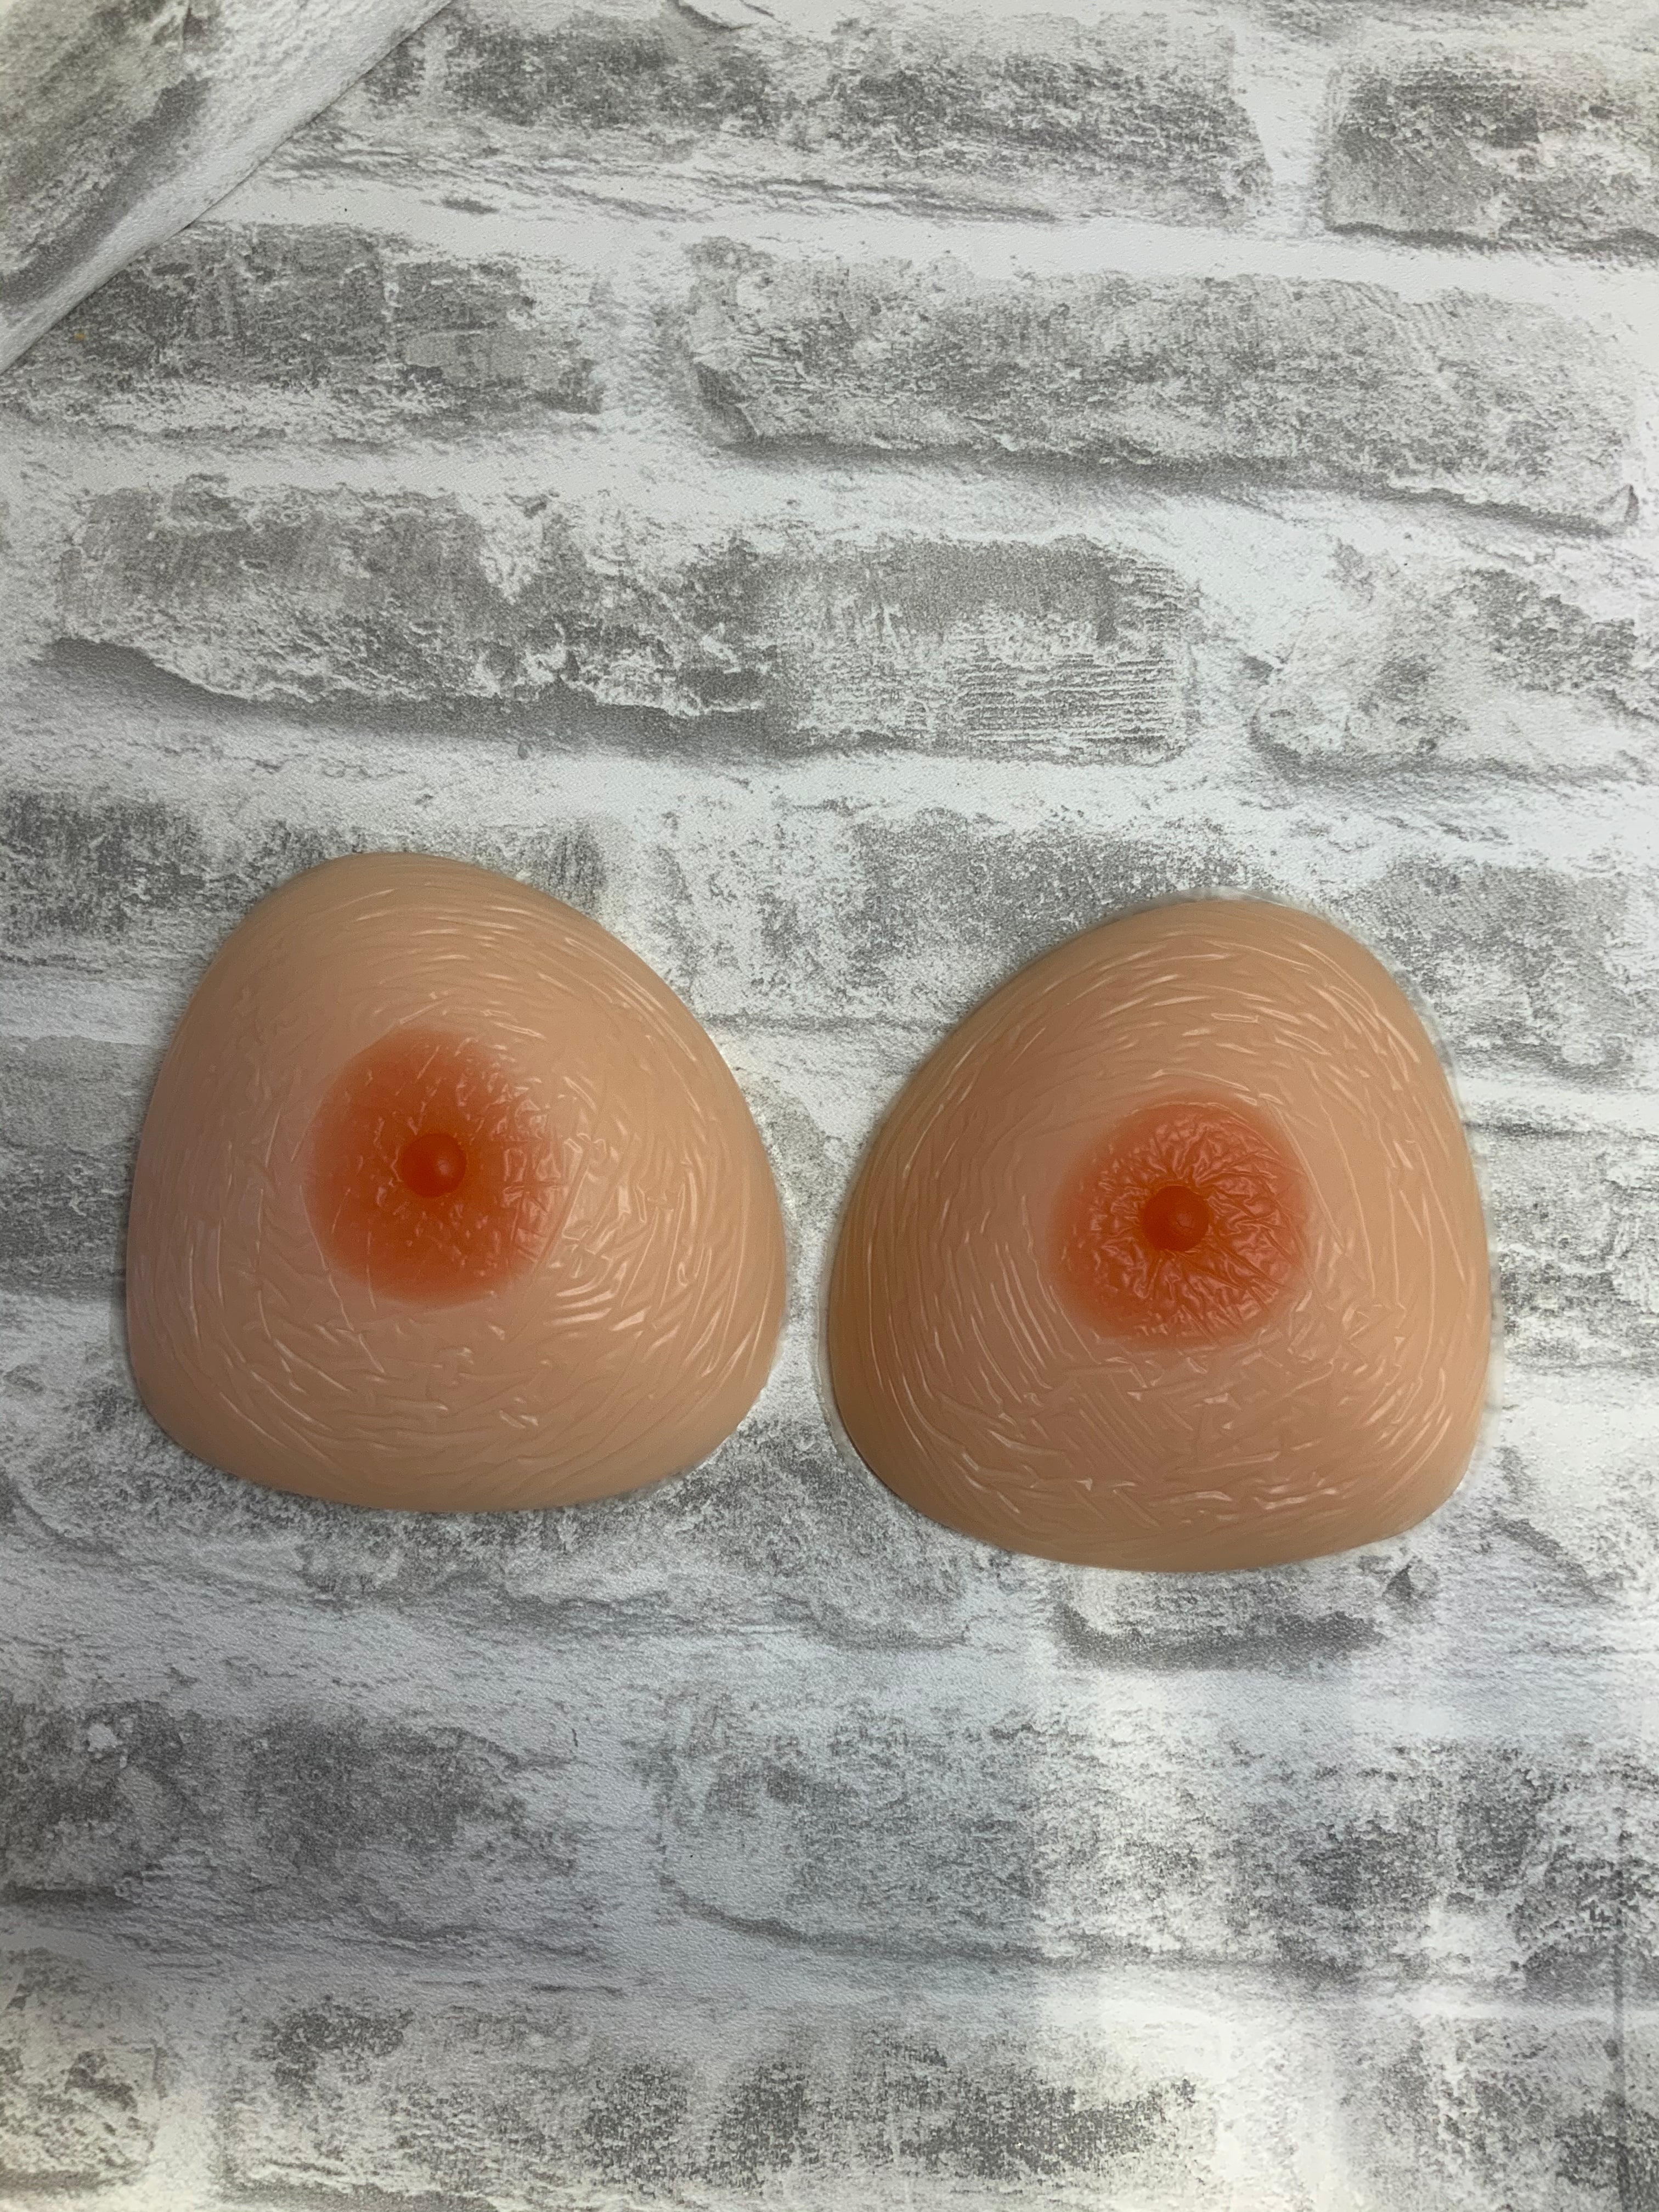 Vollence Silicone Breast Forms Fake Boobs for Mastectomy